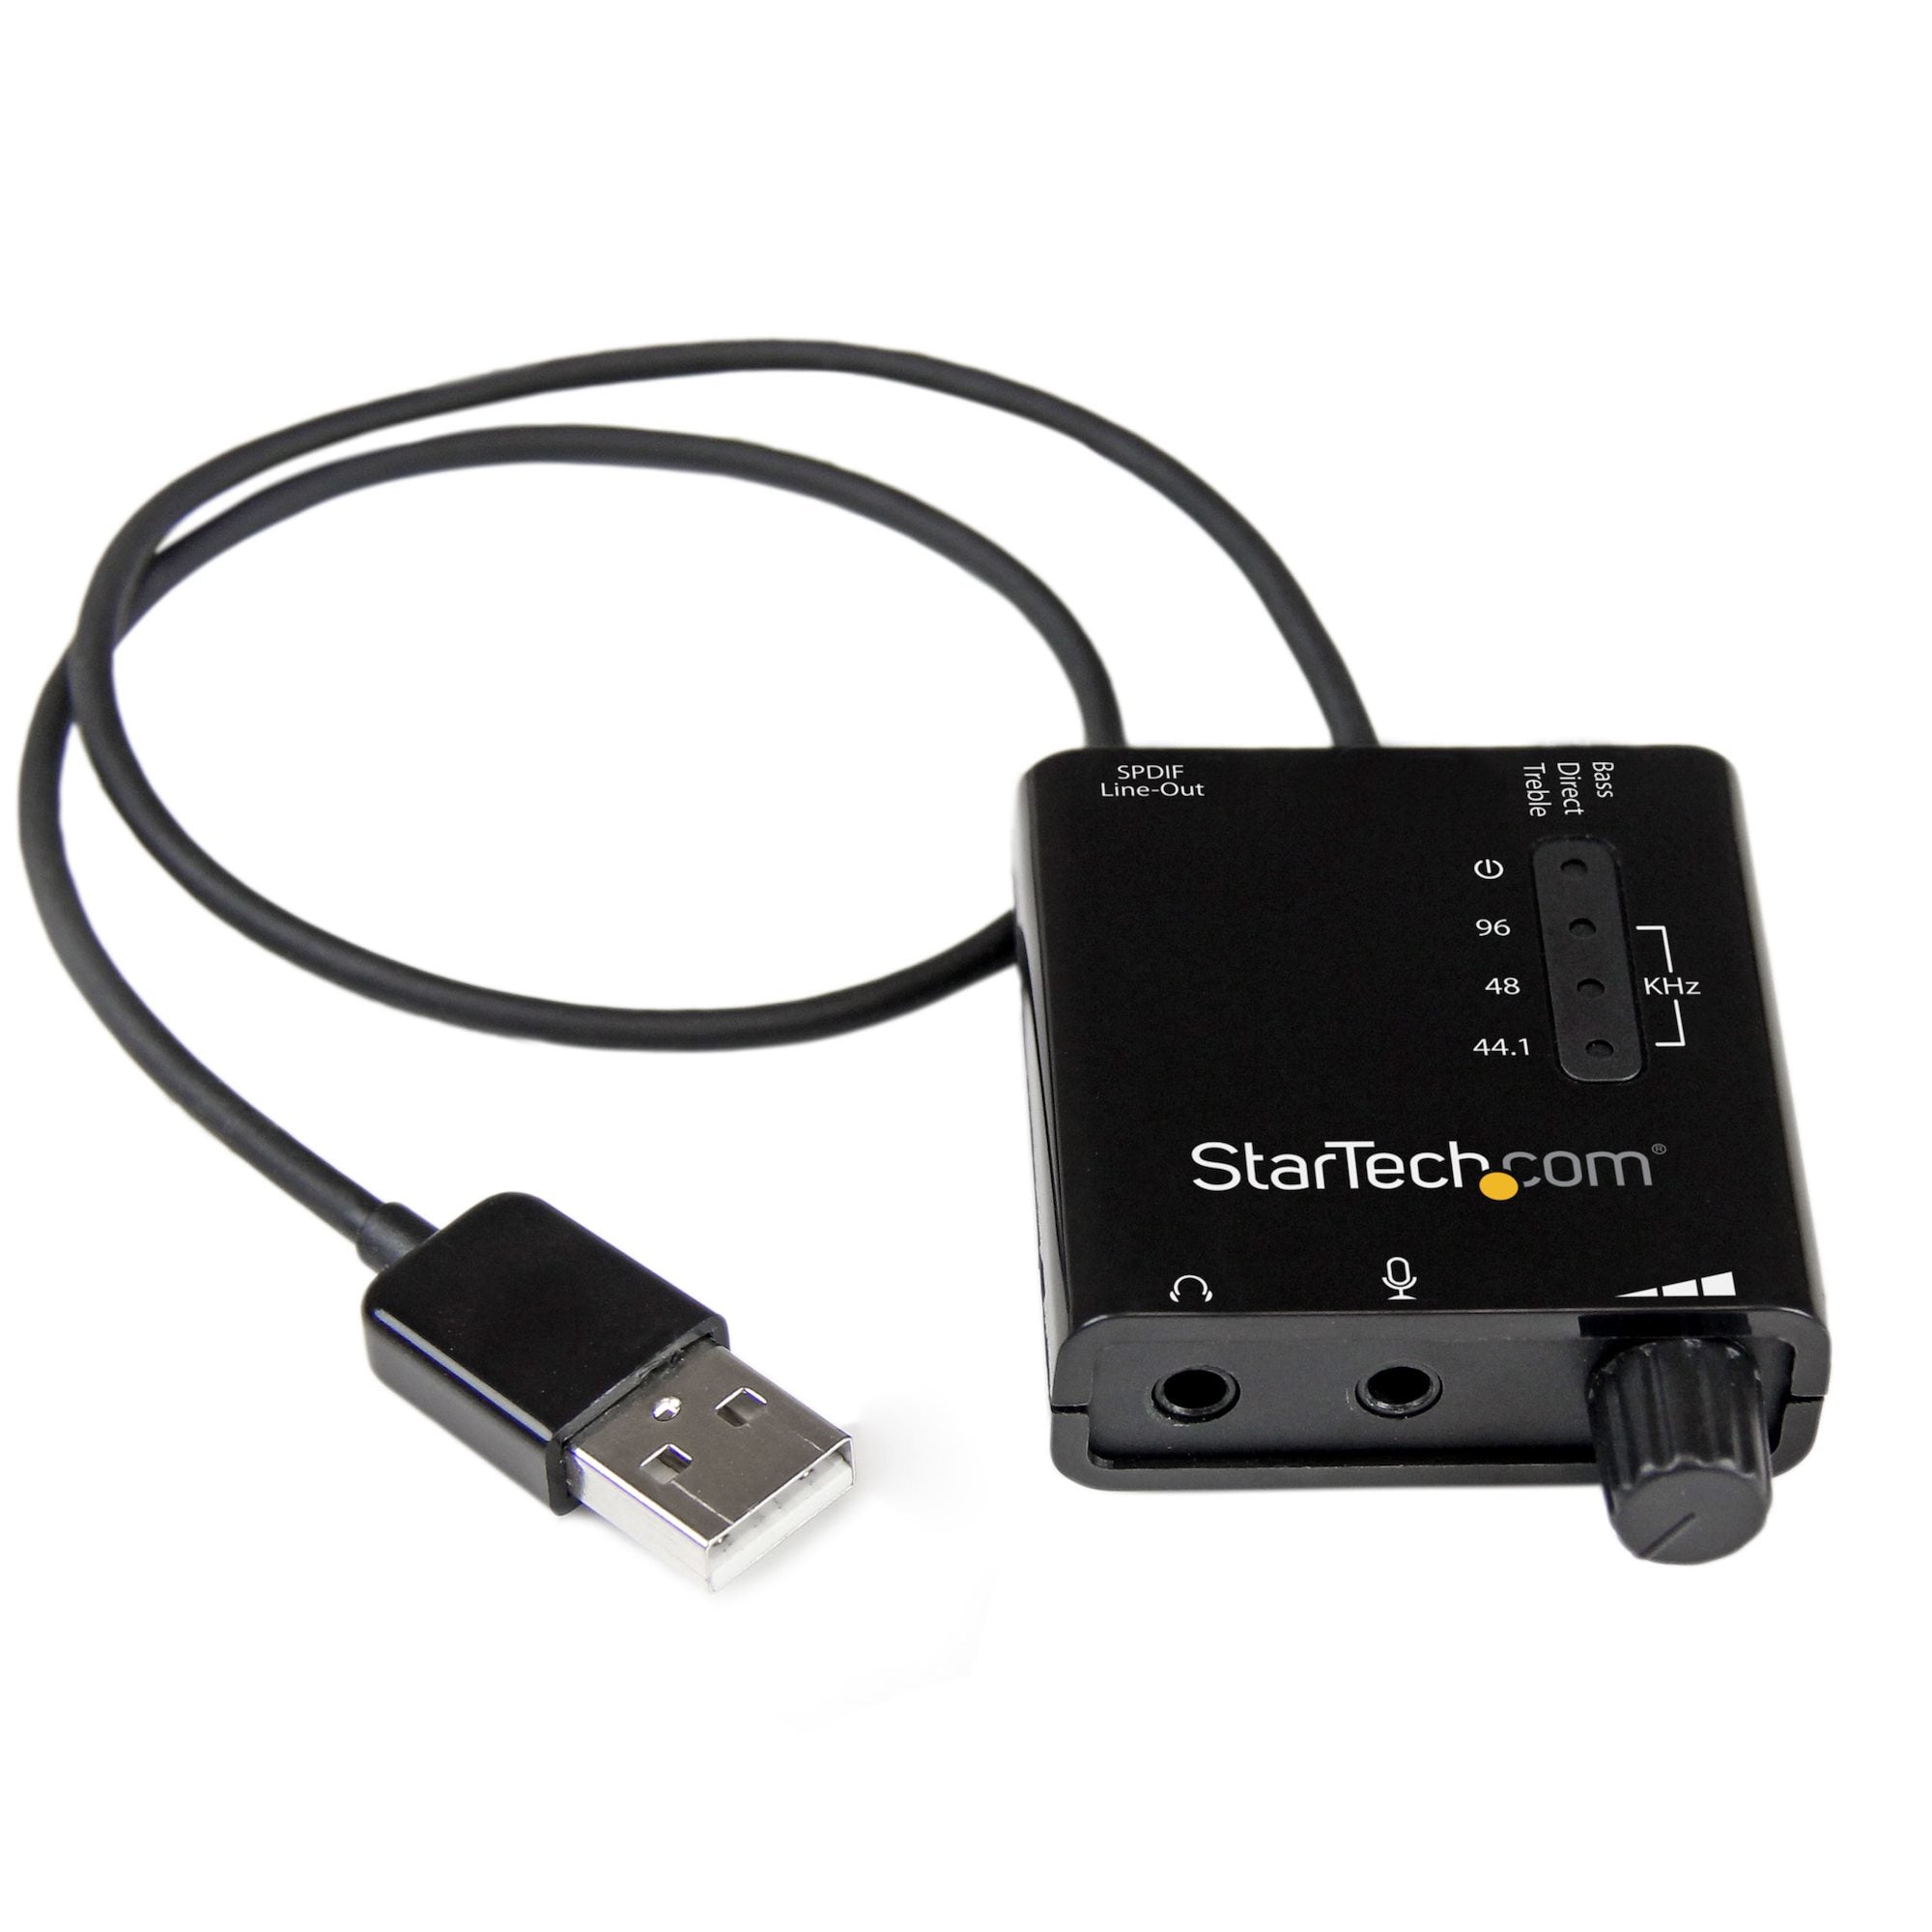 StarTech.com USB Stereo Audio Adapter External Sound Card with SPDIF Digital Audio and Stereo Mic